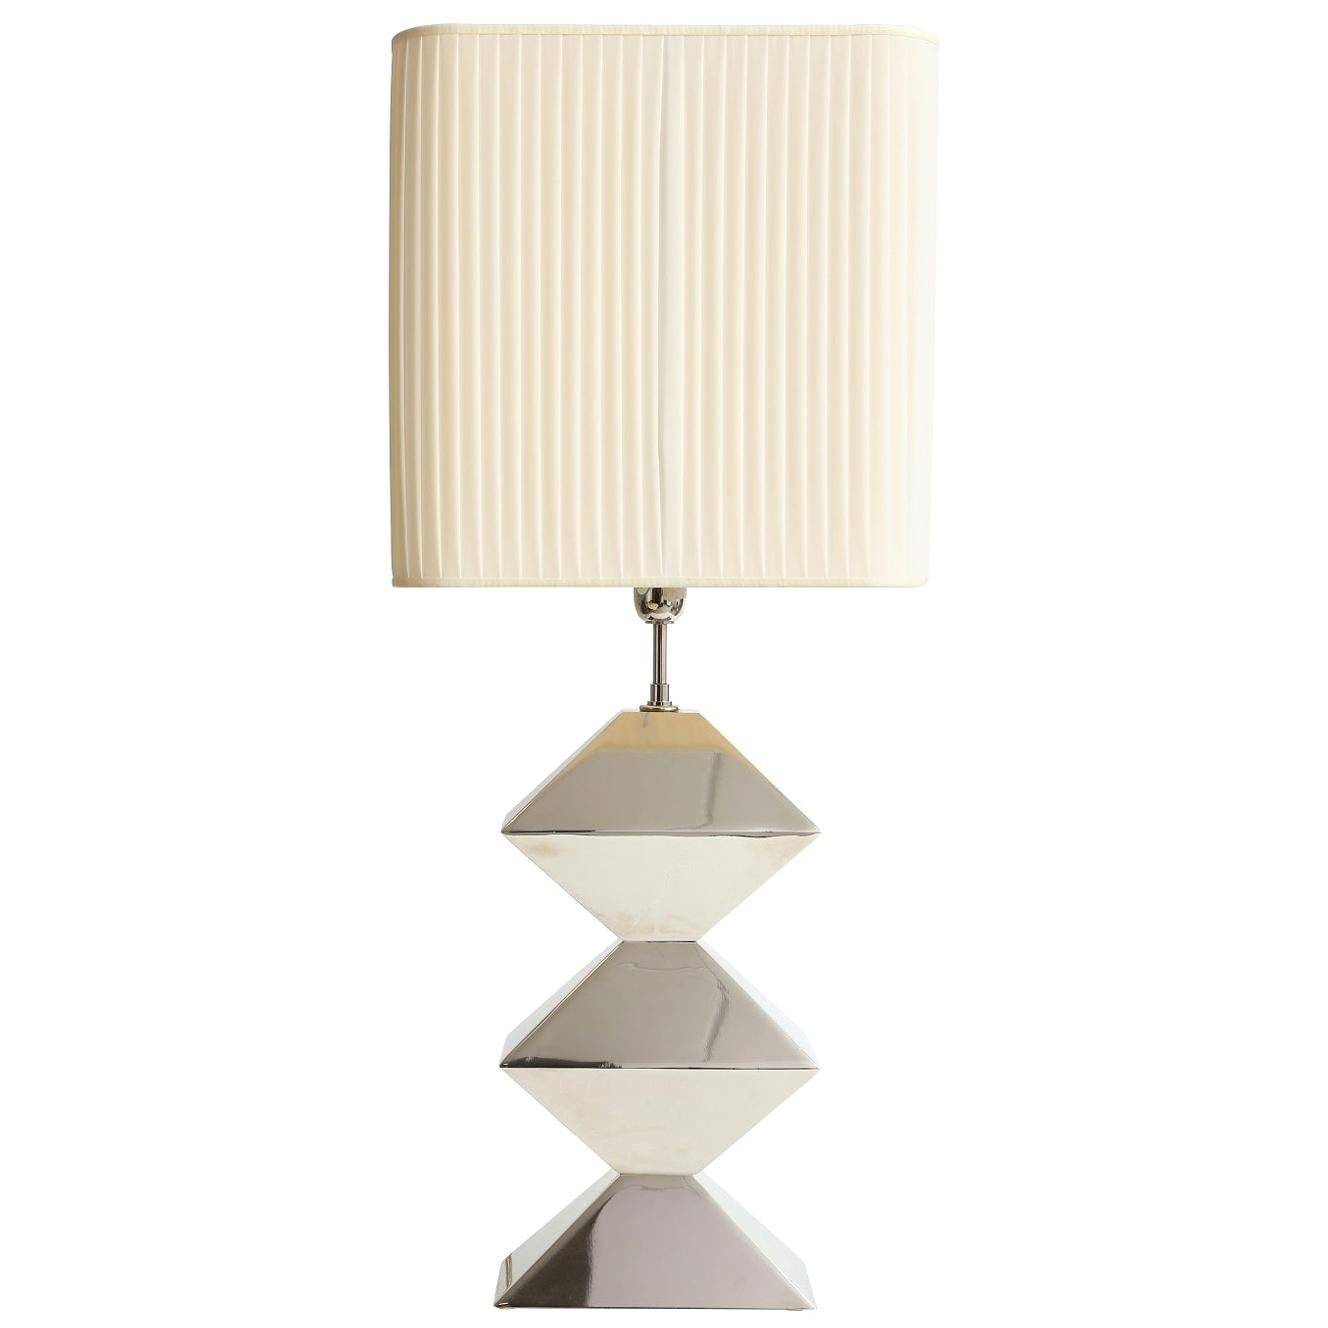 Table Lamp Piramide Nickel by Selezioni Domus, Made in Italy